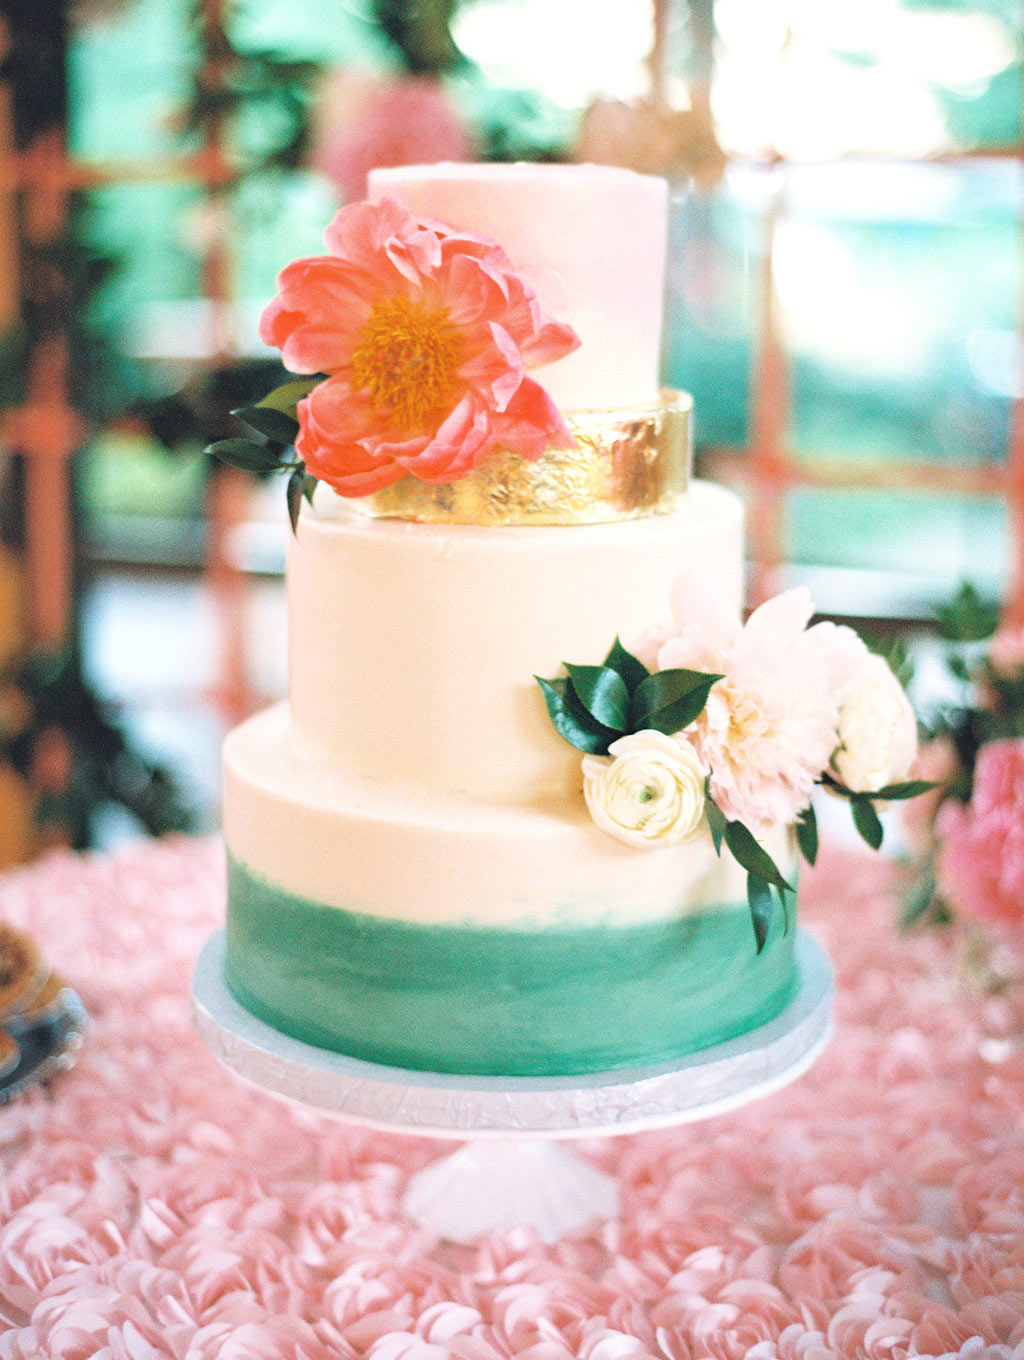 Watercolor bridal wedding cake with metallic gold layer and fresh flowers